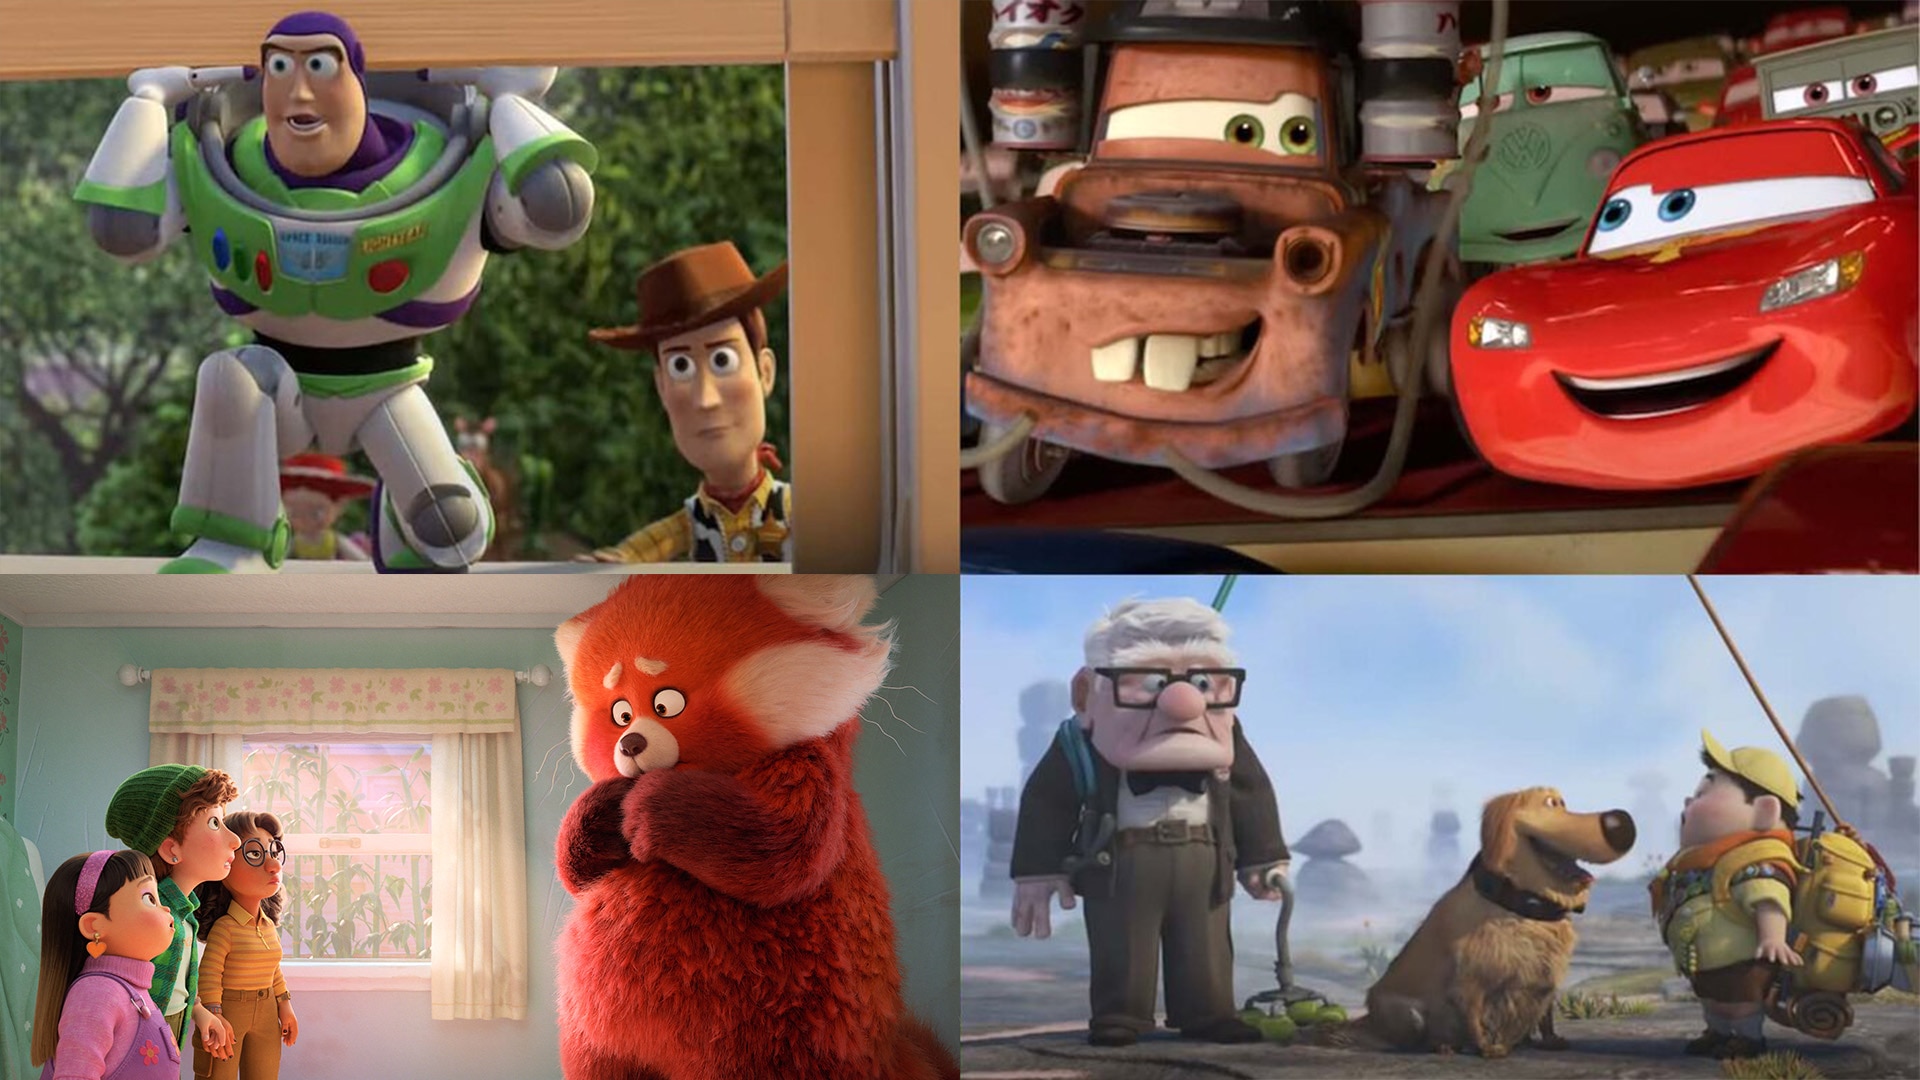 How do the newest Pixar films Soul and Luca compare to each other